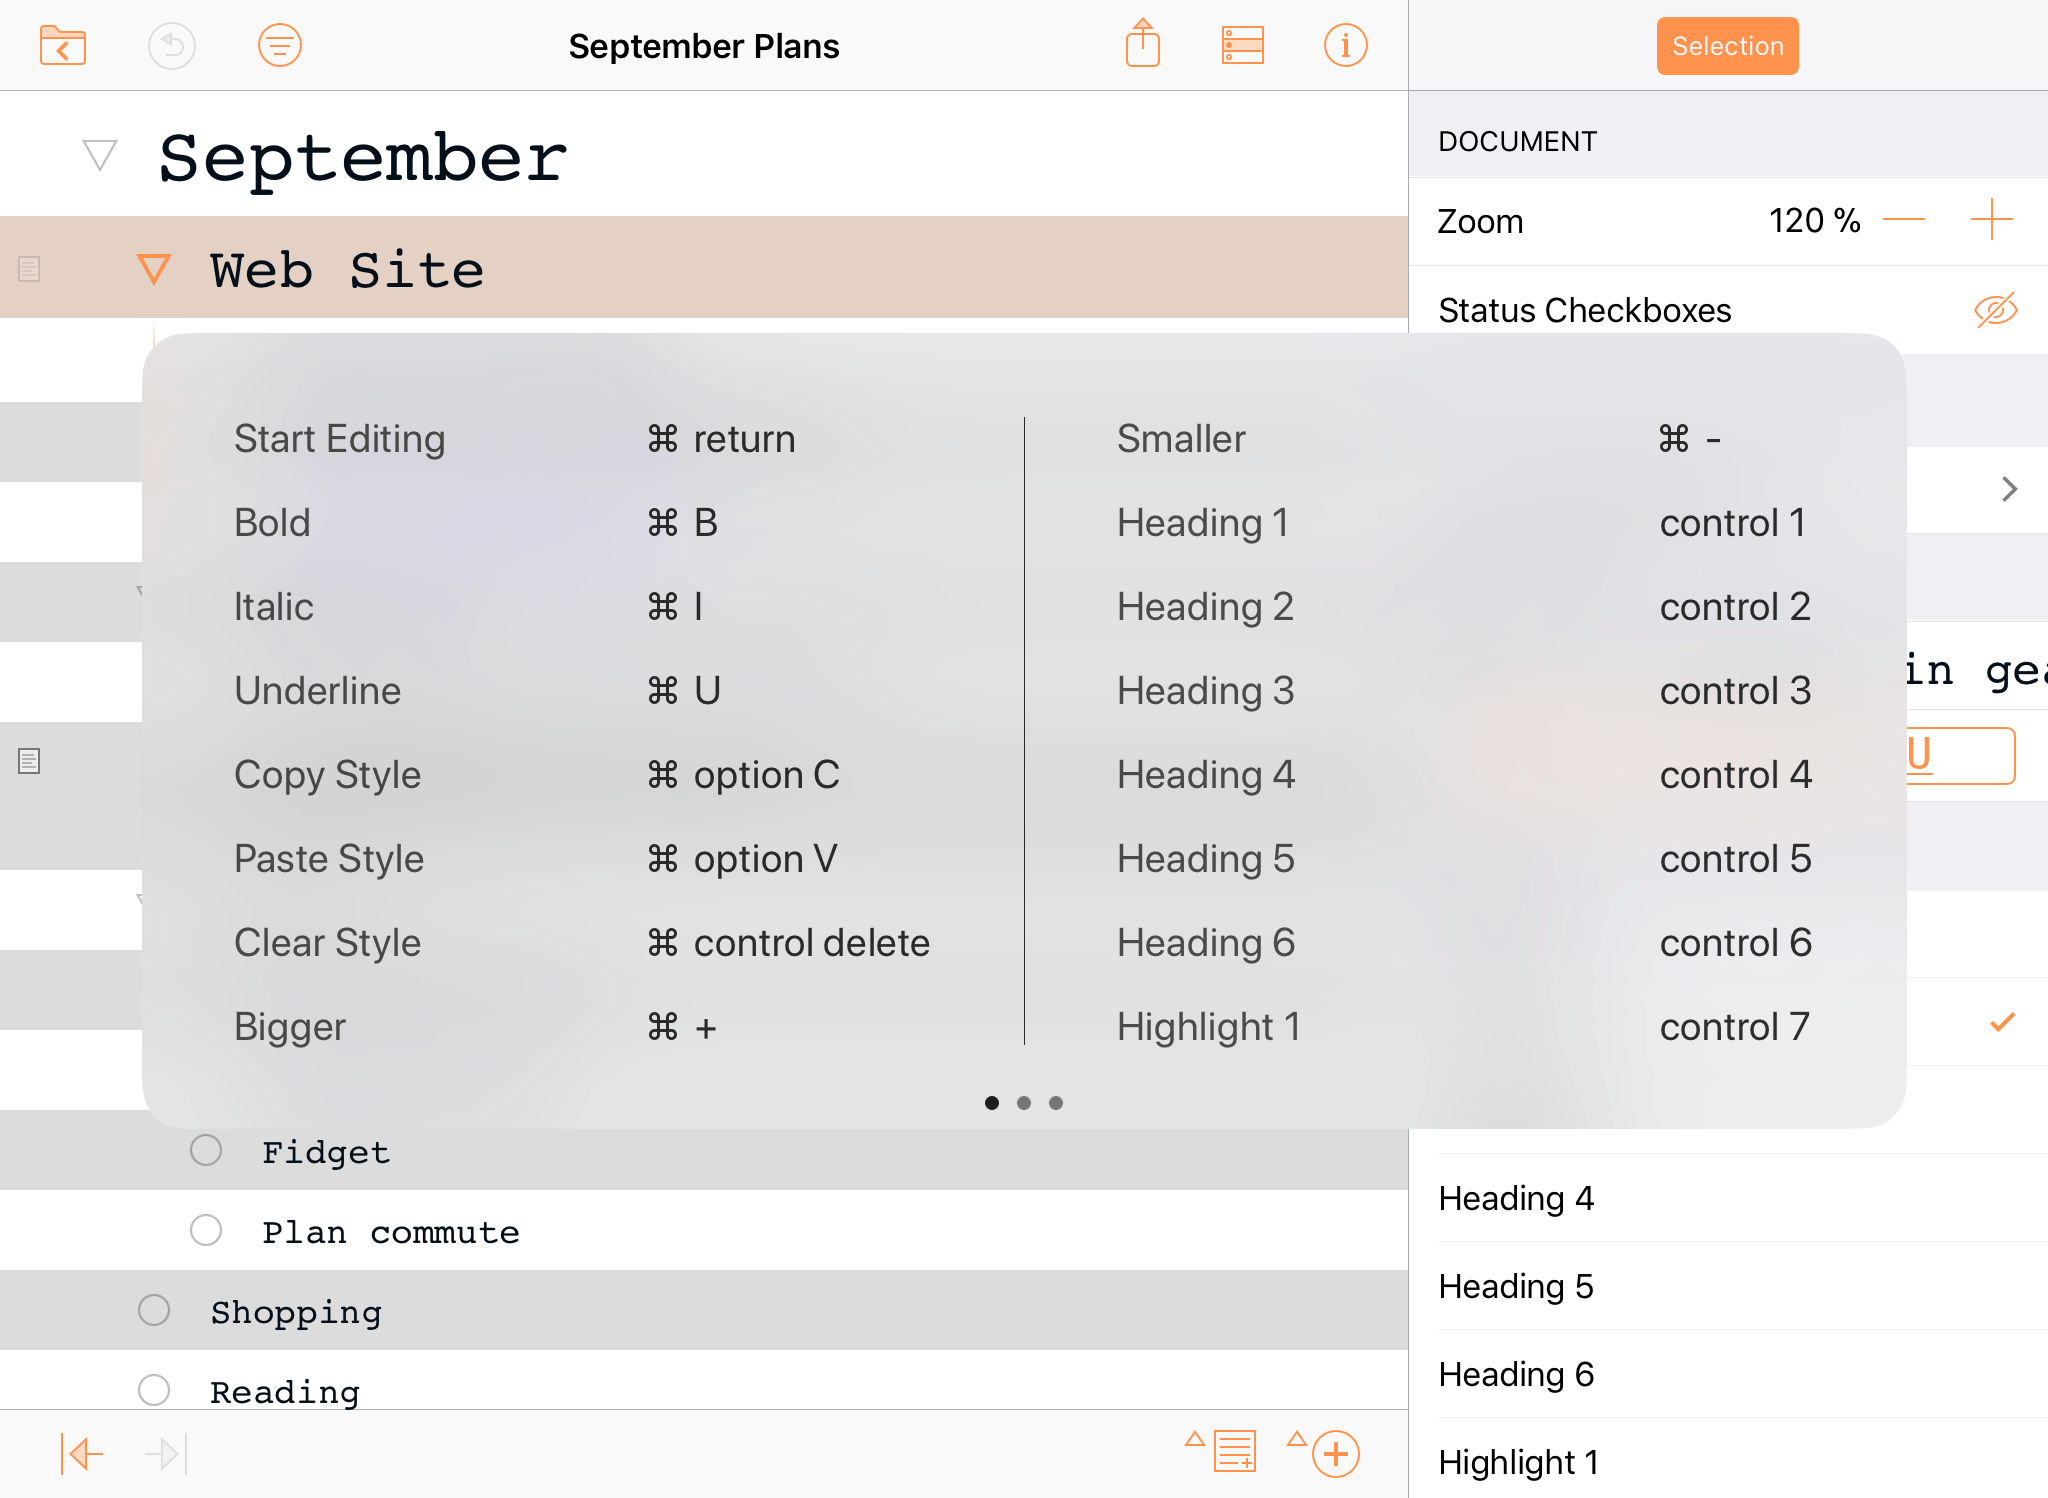 Keyboard shortcuts revealed in an OmniOutliner document